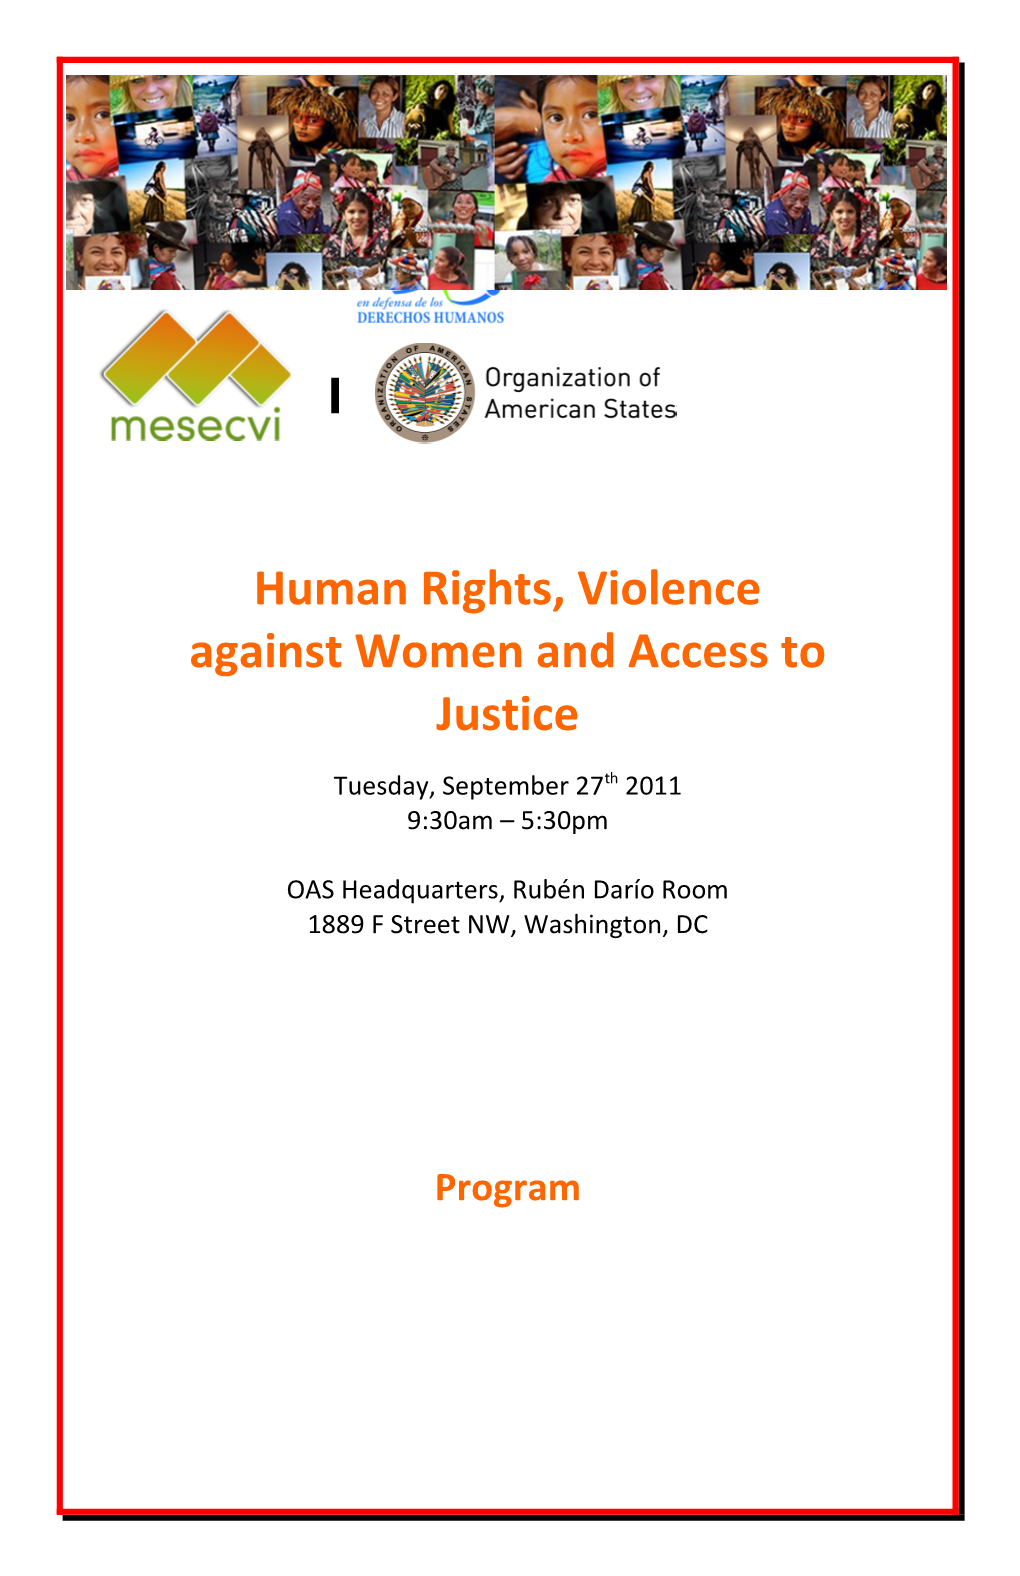 Human Rights, Violence Against Women and Access to Justice